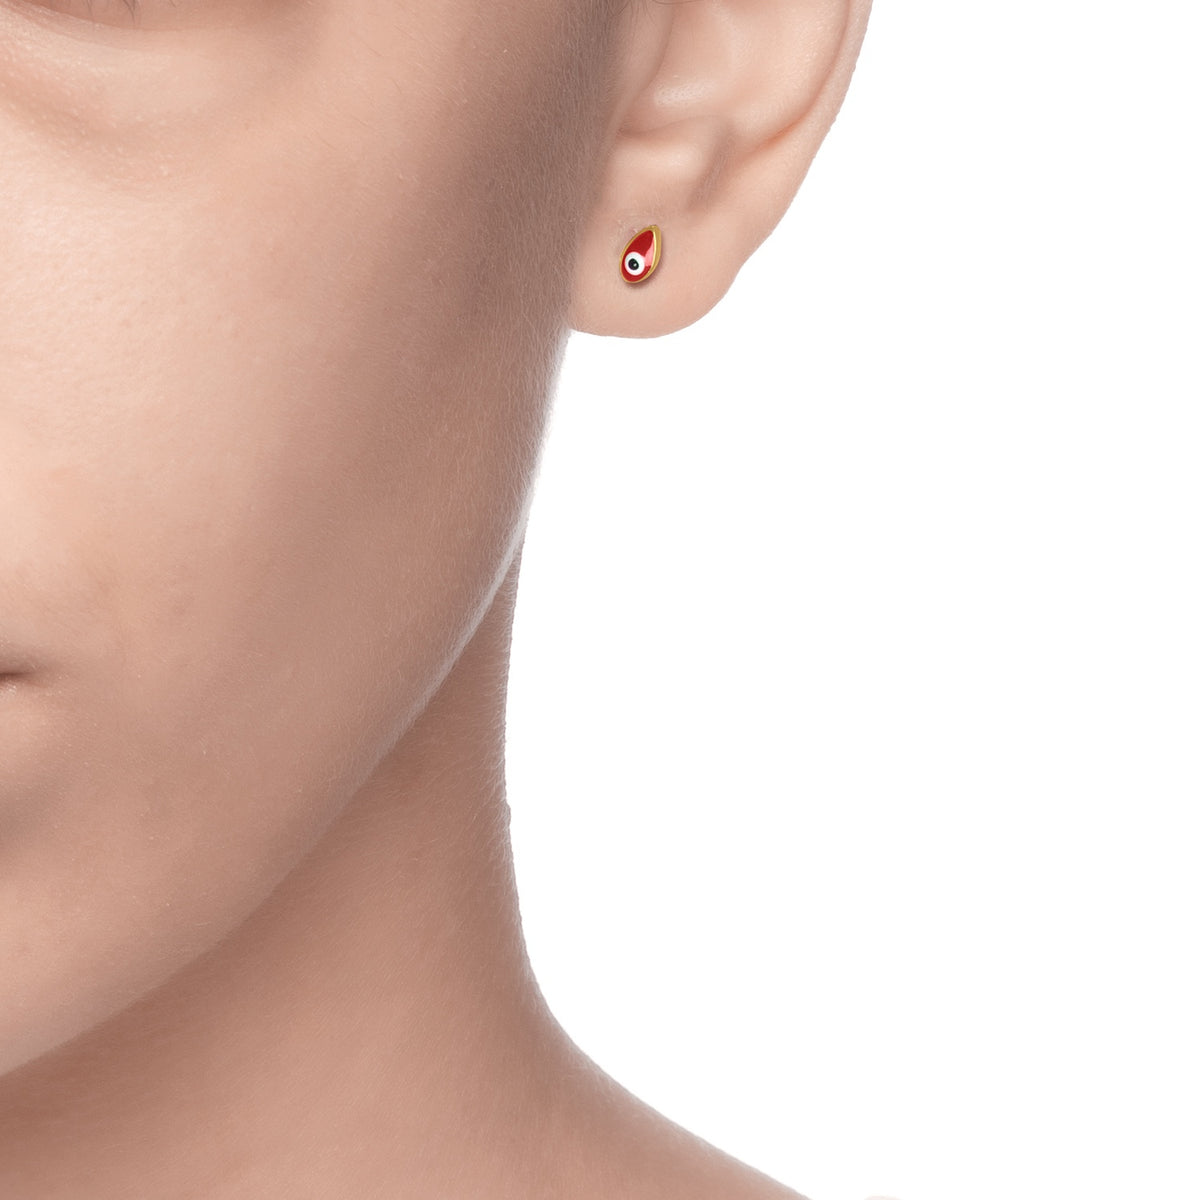 MATI | Drop Studs | Red Enamel | 18K Gold Plated 925 Silver